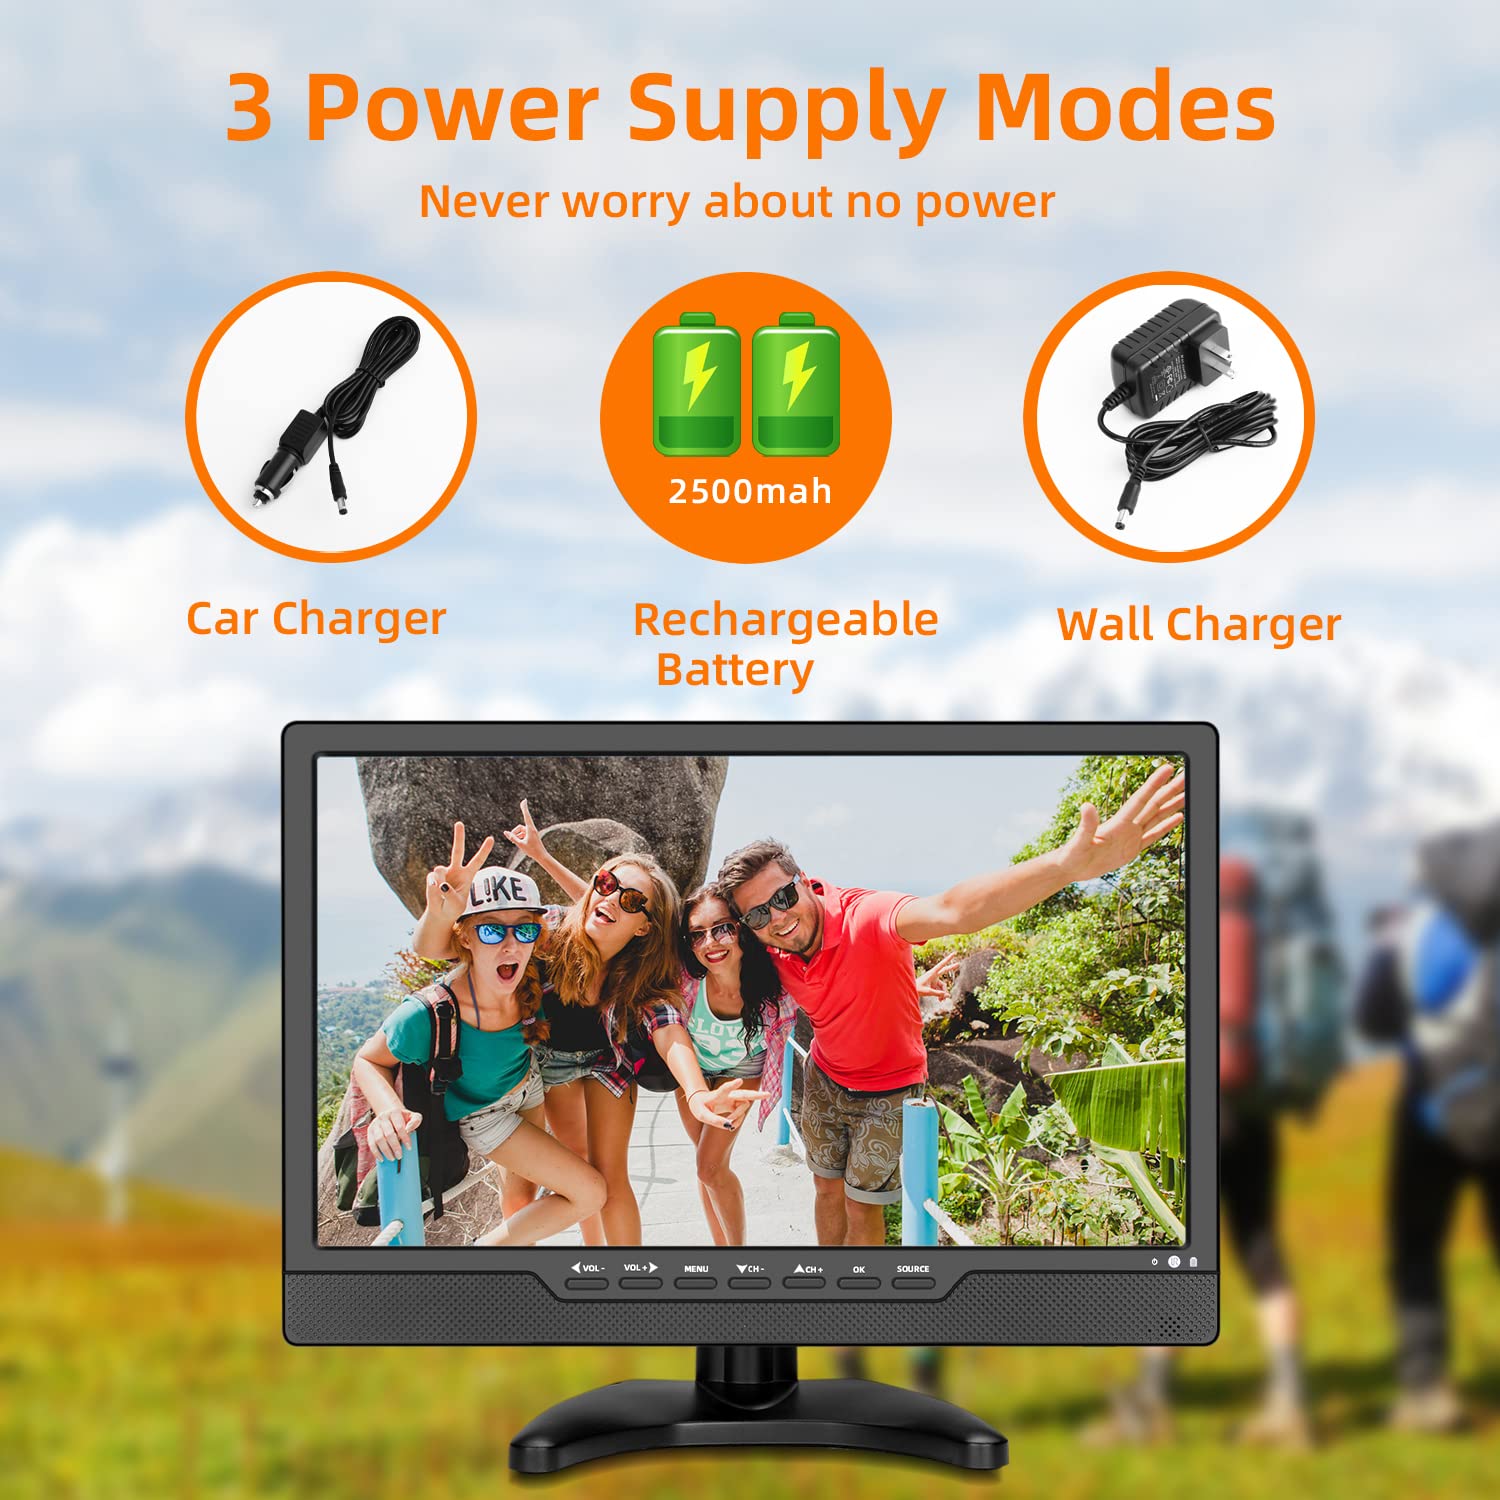 Jexiop 14" Portable TV,Small Full HD 1080P TV with Digital ATSC Tuner,Rechargeable Battery,Antenna and HDMI/USB Ports,12 Volt Charger Cable for Car Kitchen Travel Monitor